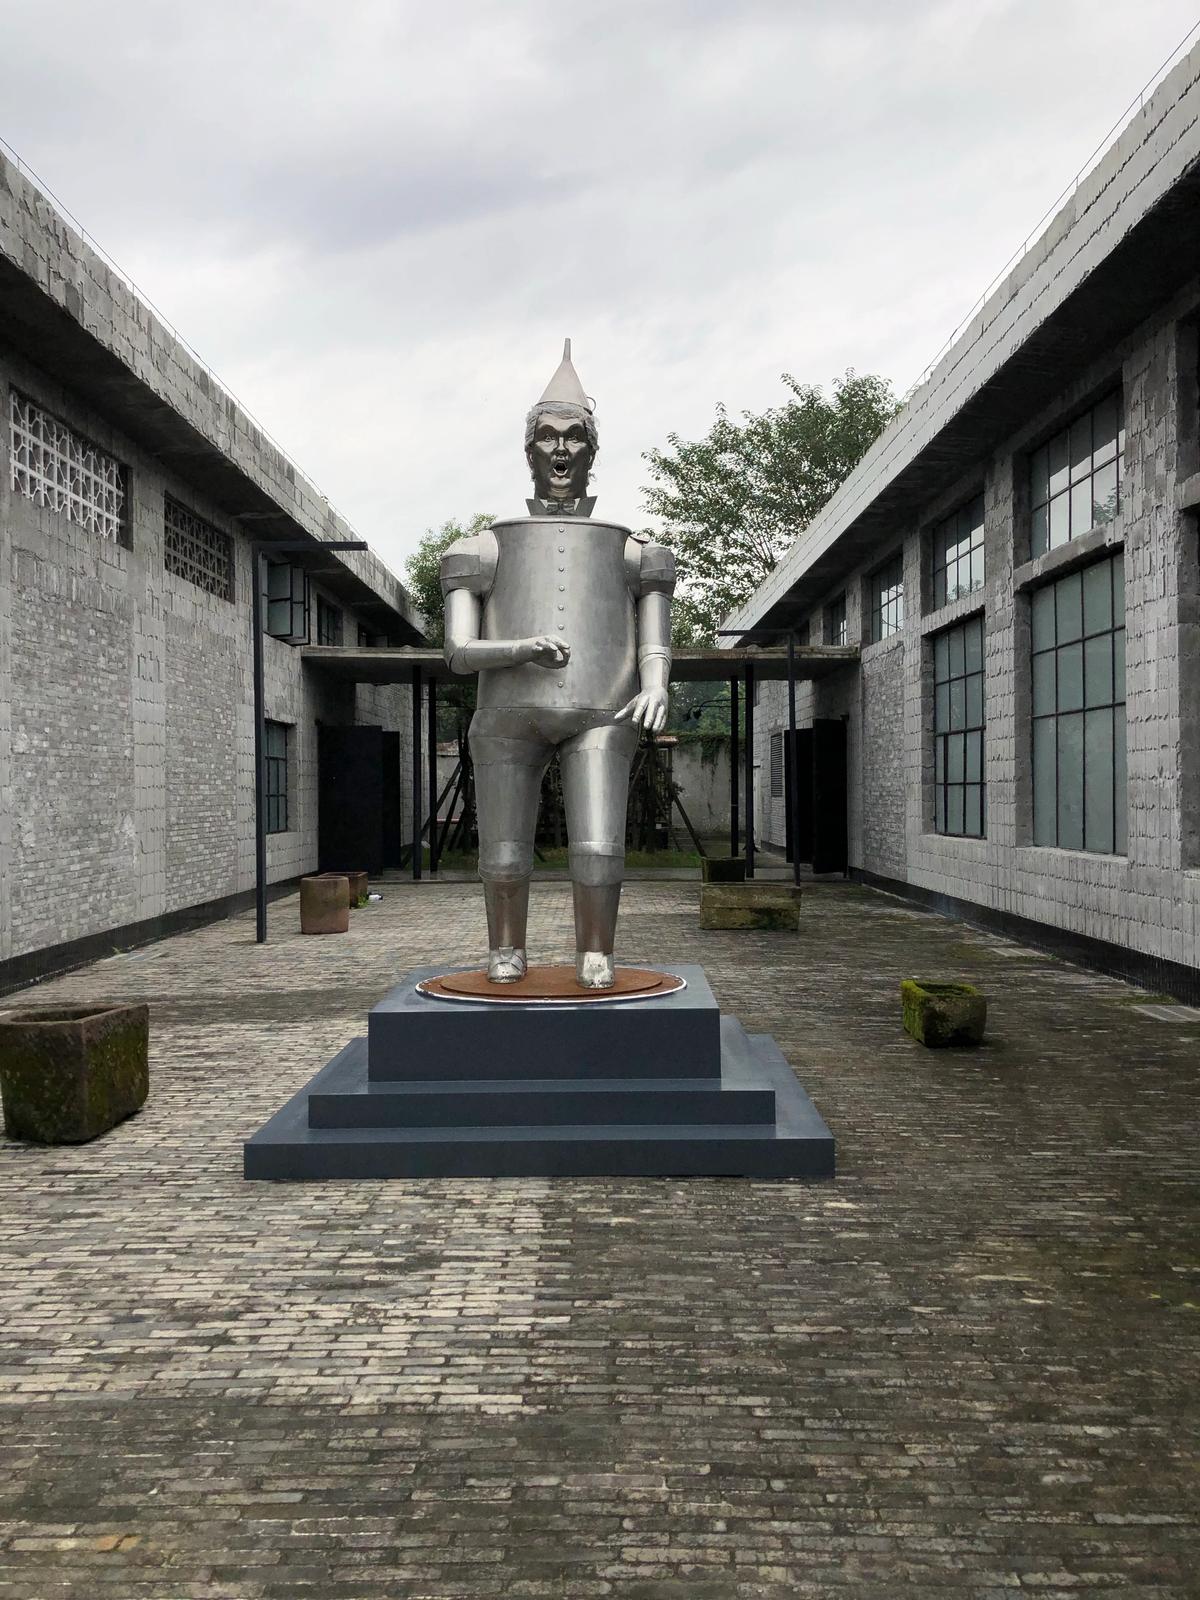 Coco Fusco's Tin Man of the Twenty-First Century arrives at China's Anren Biennale Courtesy of Tettero, Anren Biennale 2019 © Coco Fusco/Artists Rights Society (ARS), New York